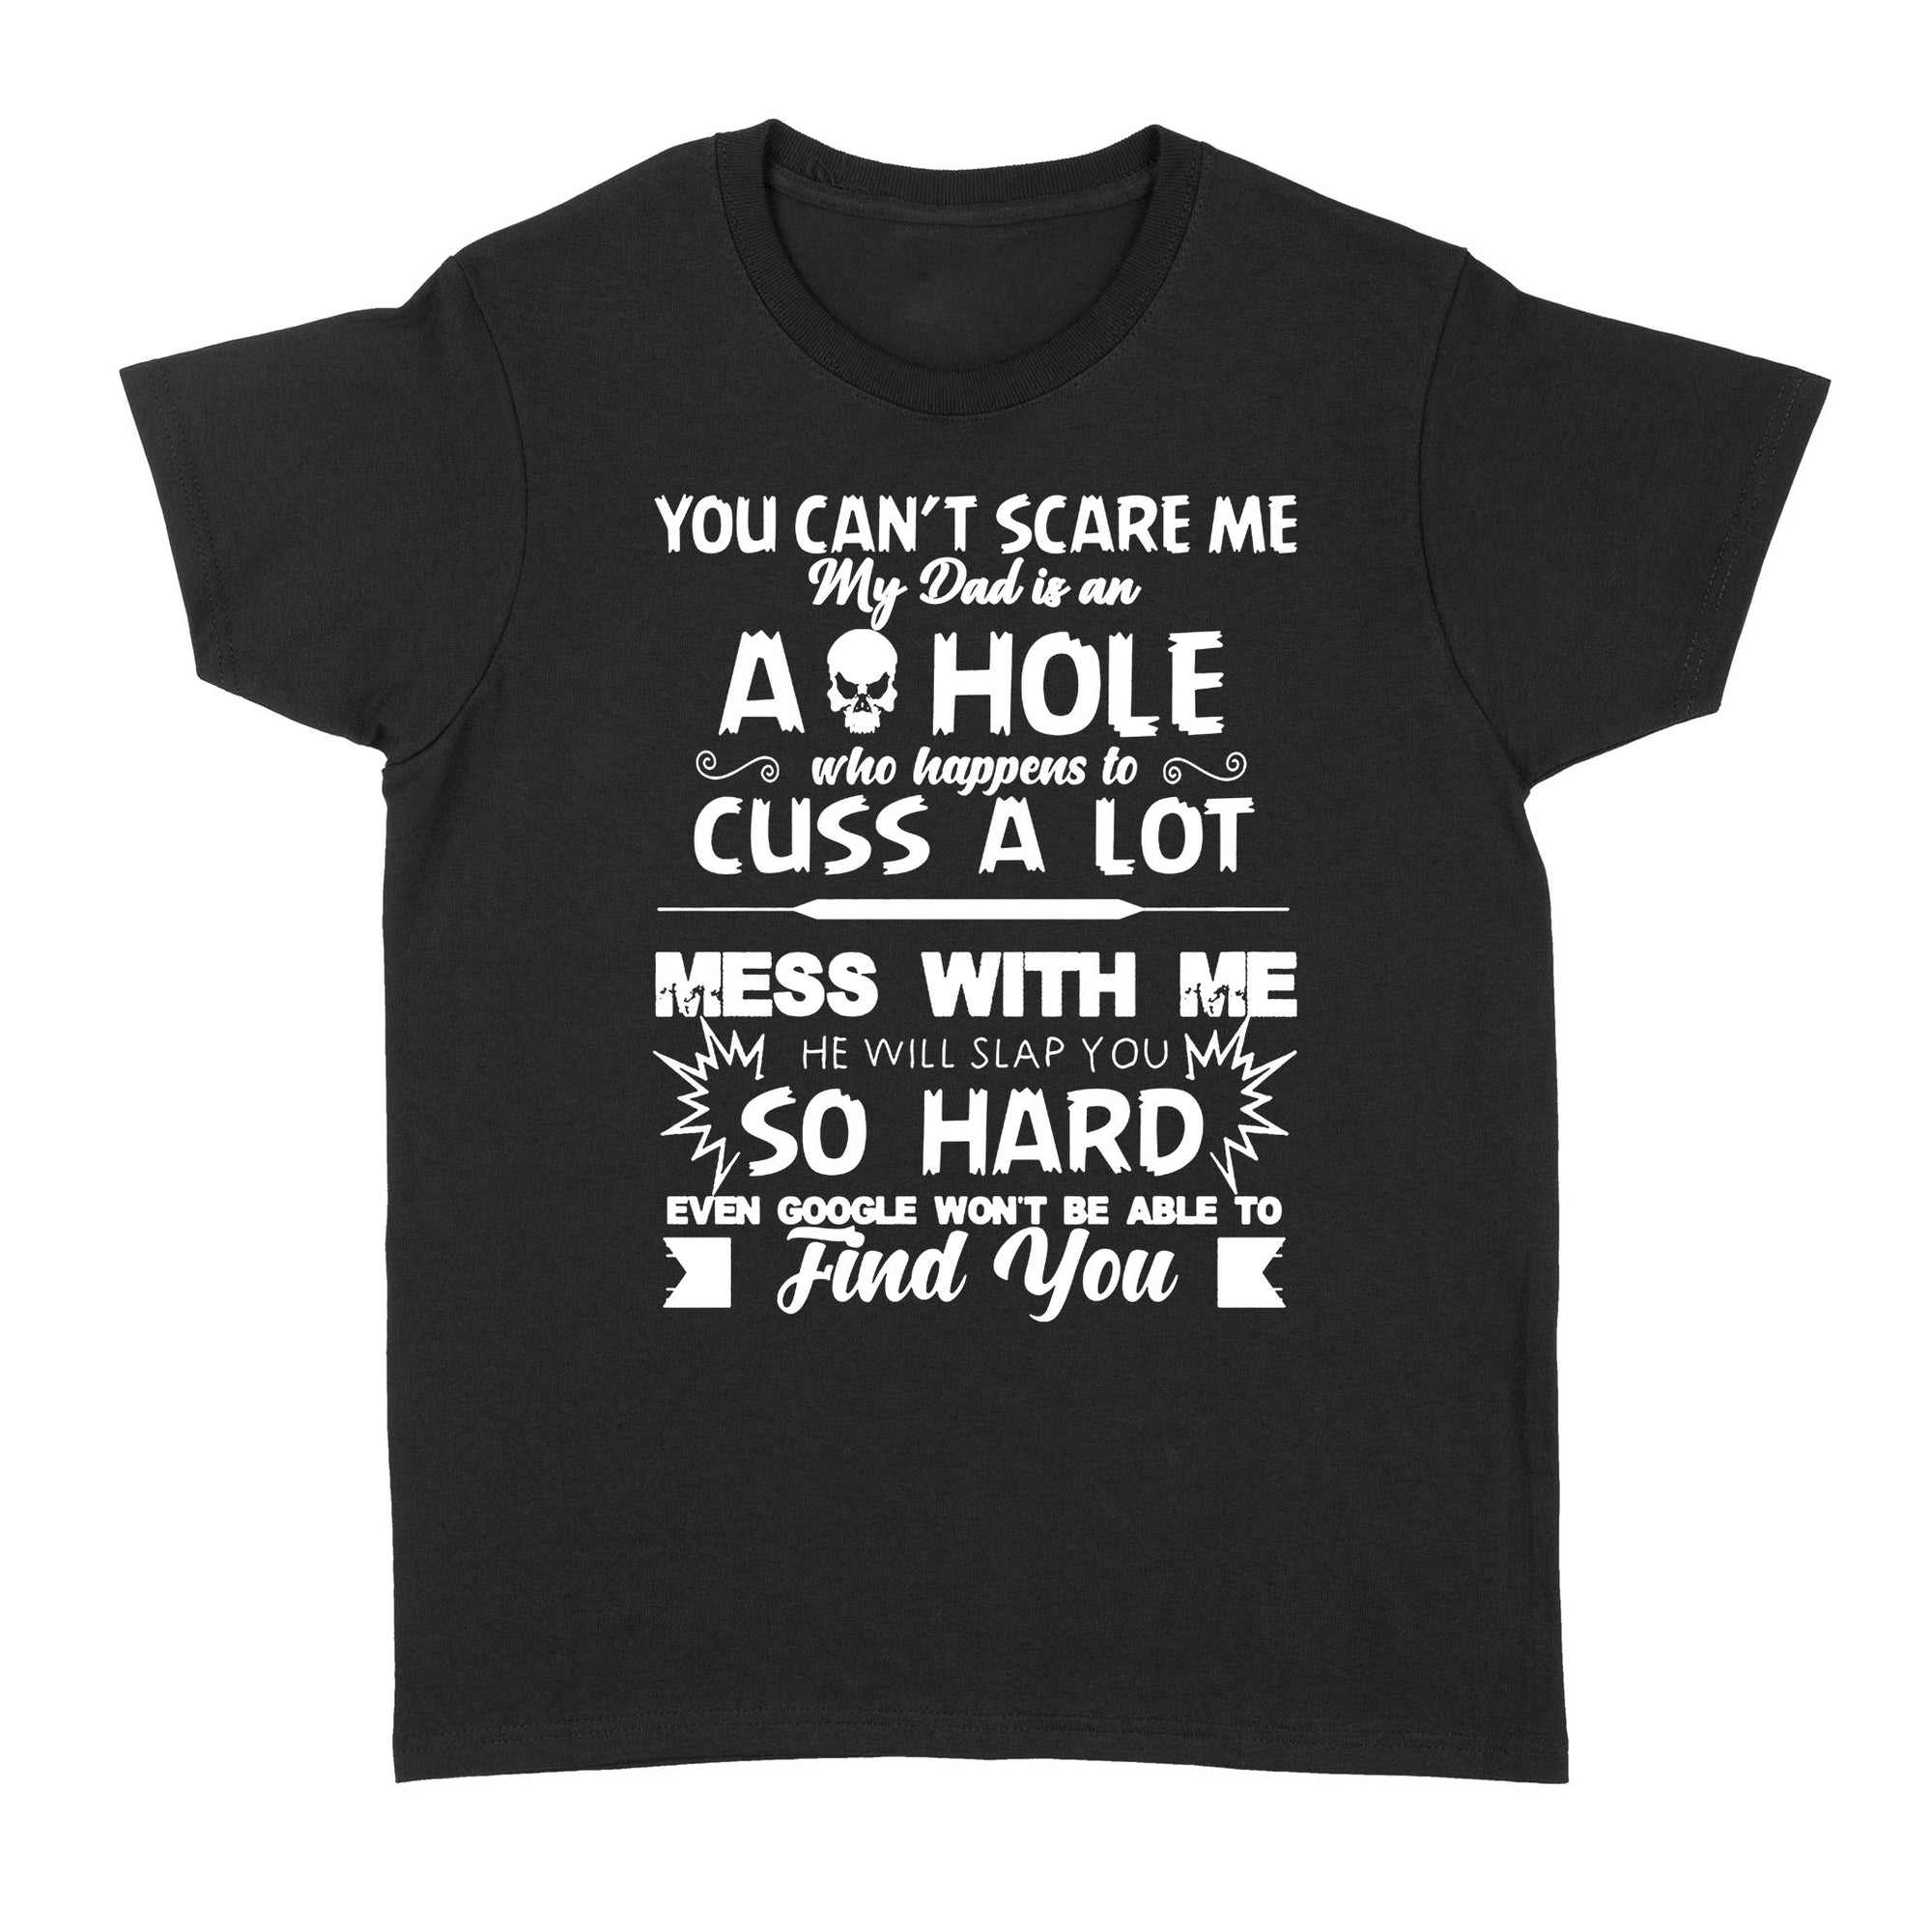 Gift Ideas for Daughter You Can't Scare Me My Dad Is An Asshole Who Happens To Cuss A Lot Mess With Me - Standard Women's T-shirt